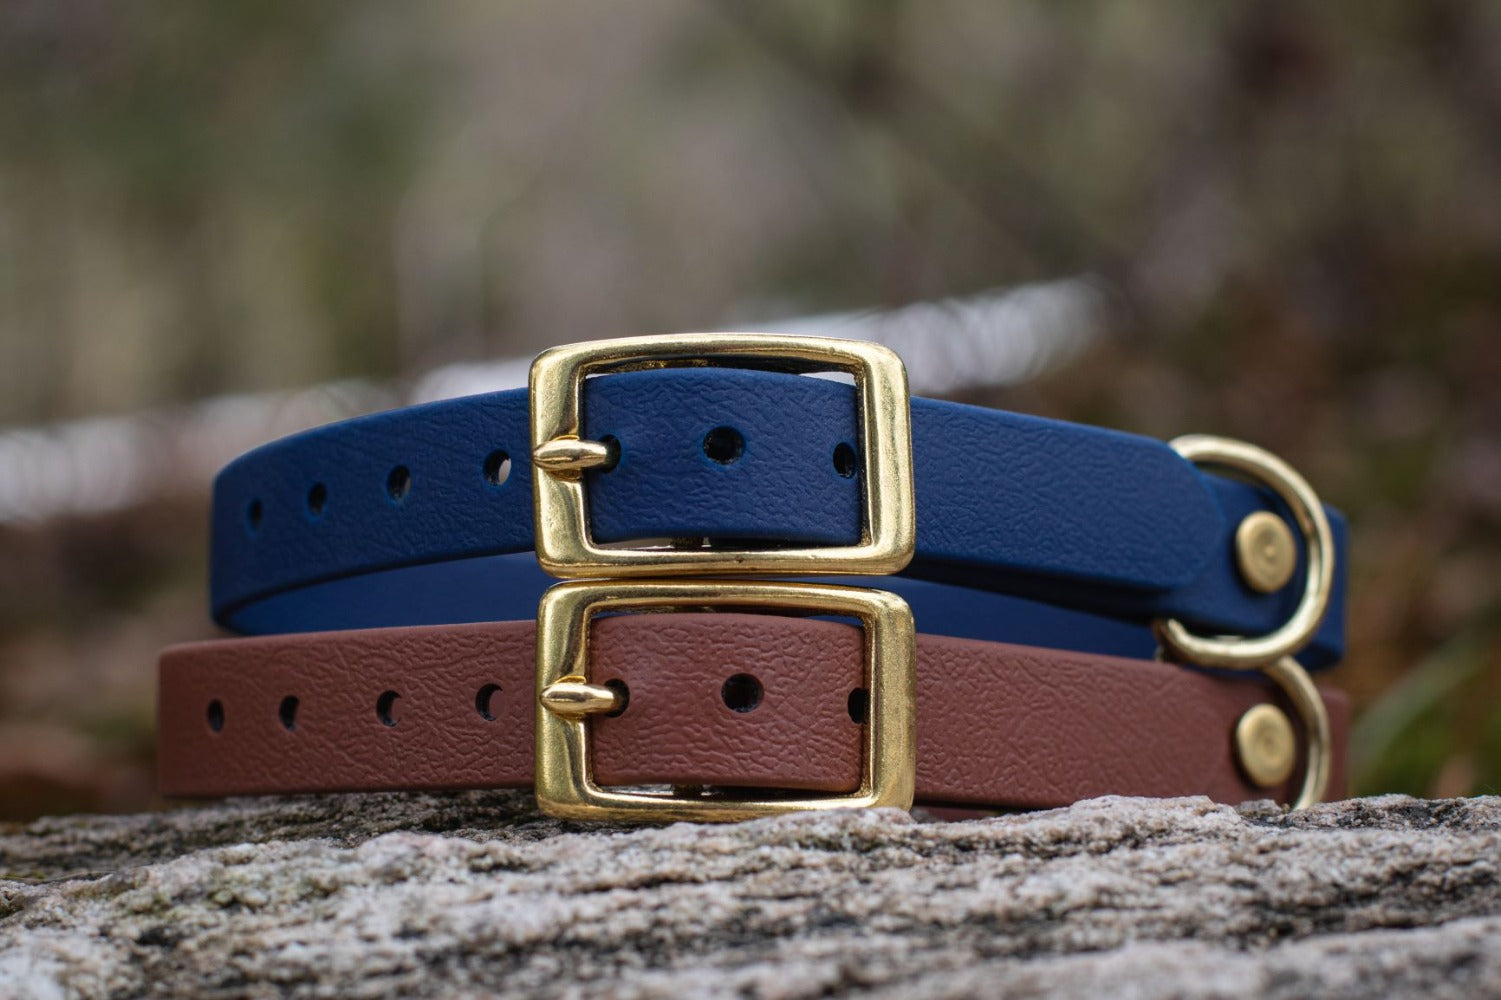 Backwoods Dog 5/8" BioThane Brass buckle collar stacked on a rock in navy and brown